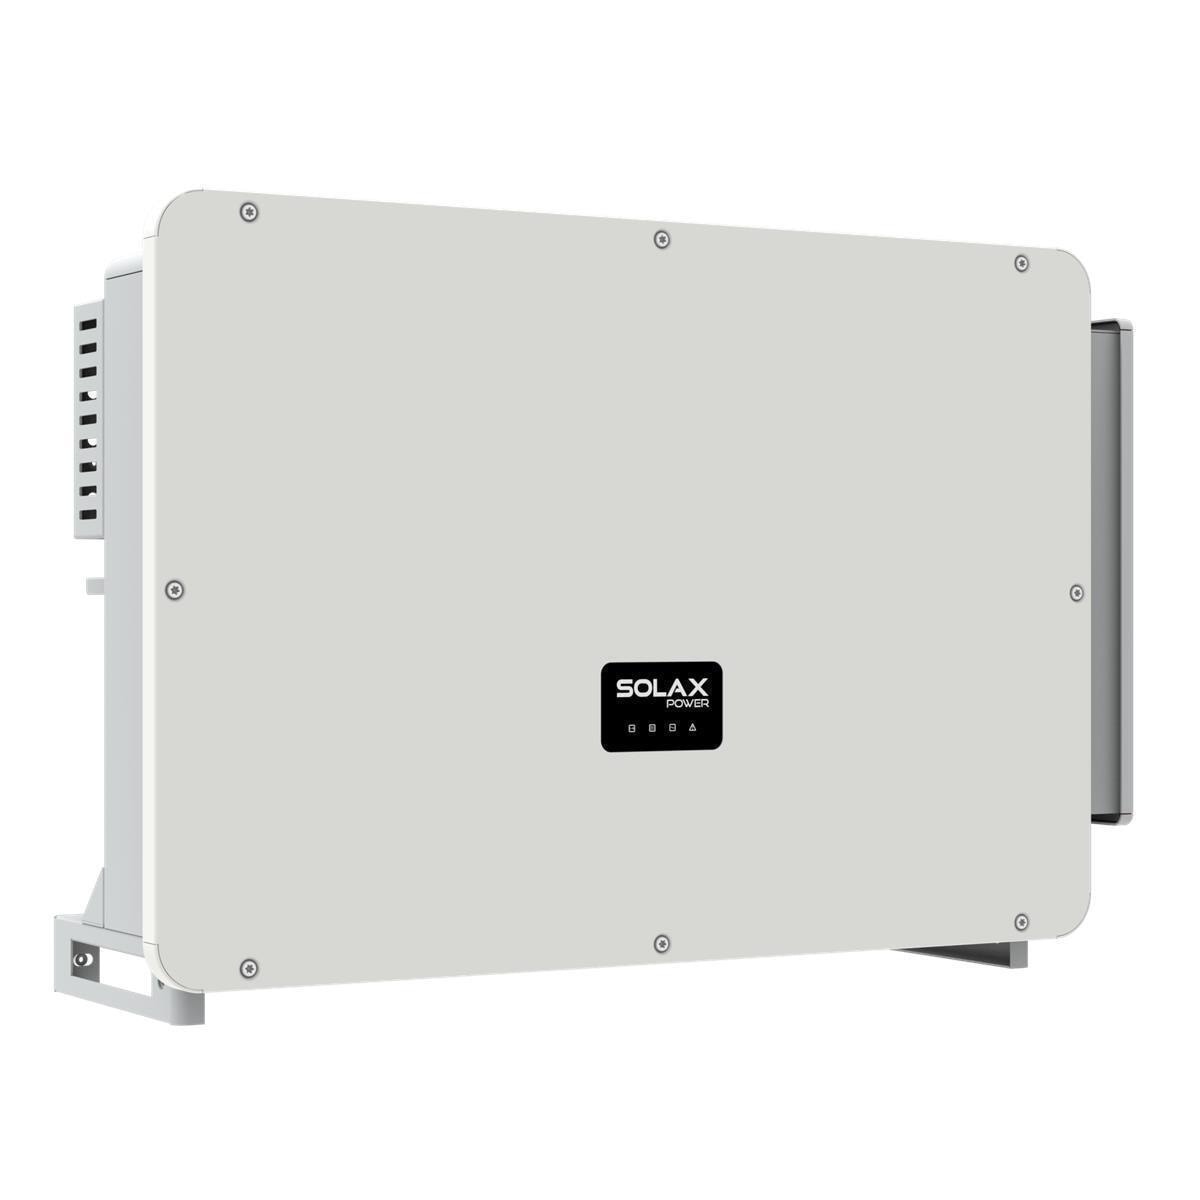 SolaX X3 Forth 100KW incl. AFCI arc detection